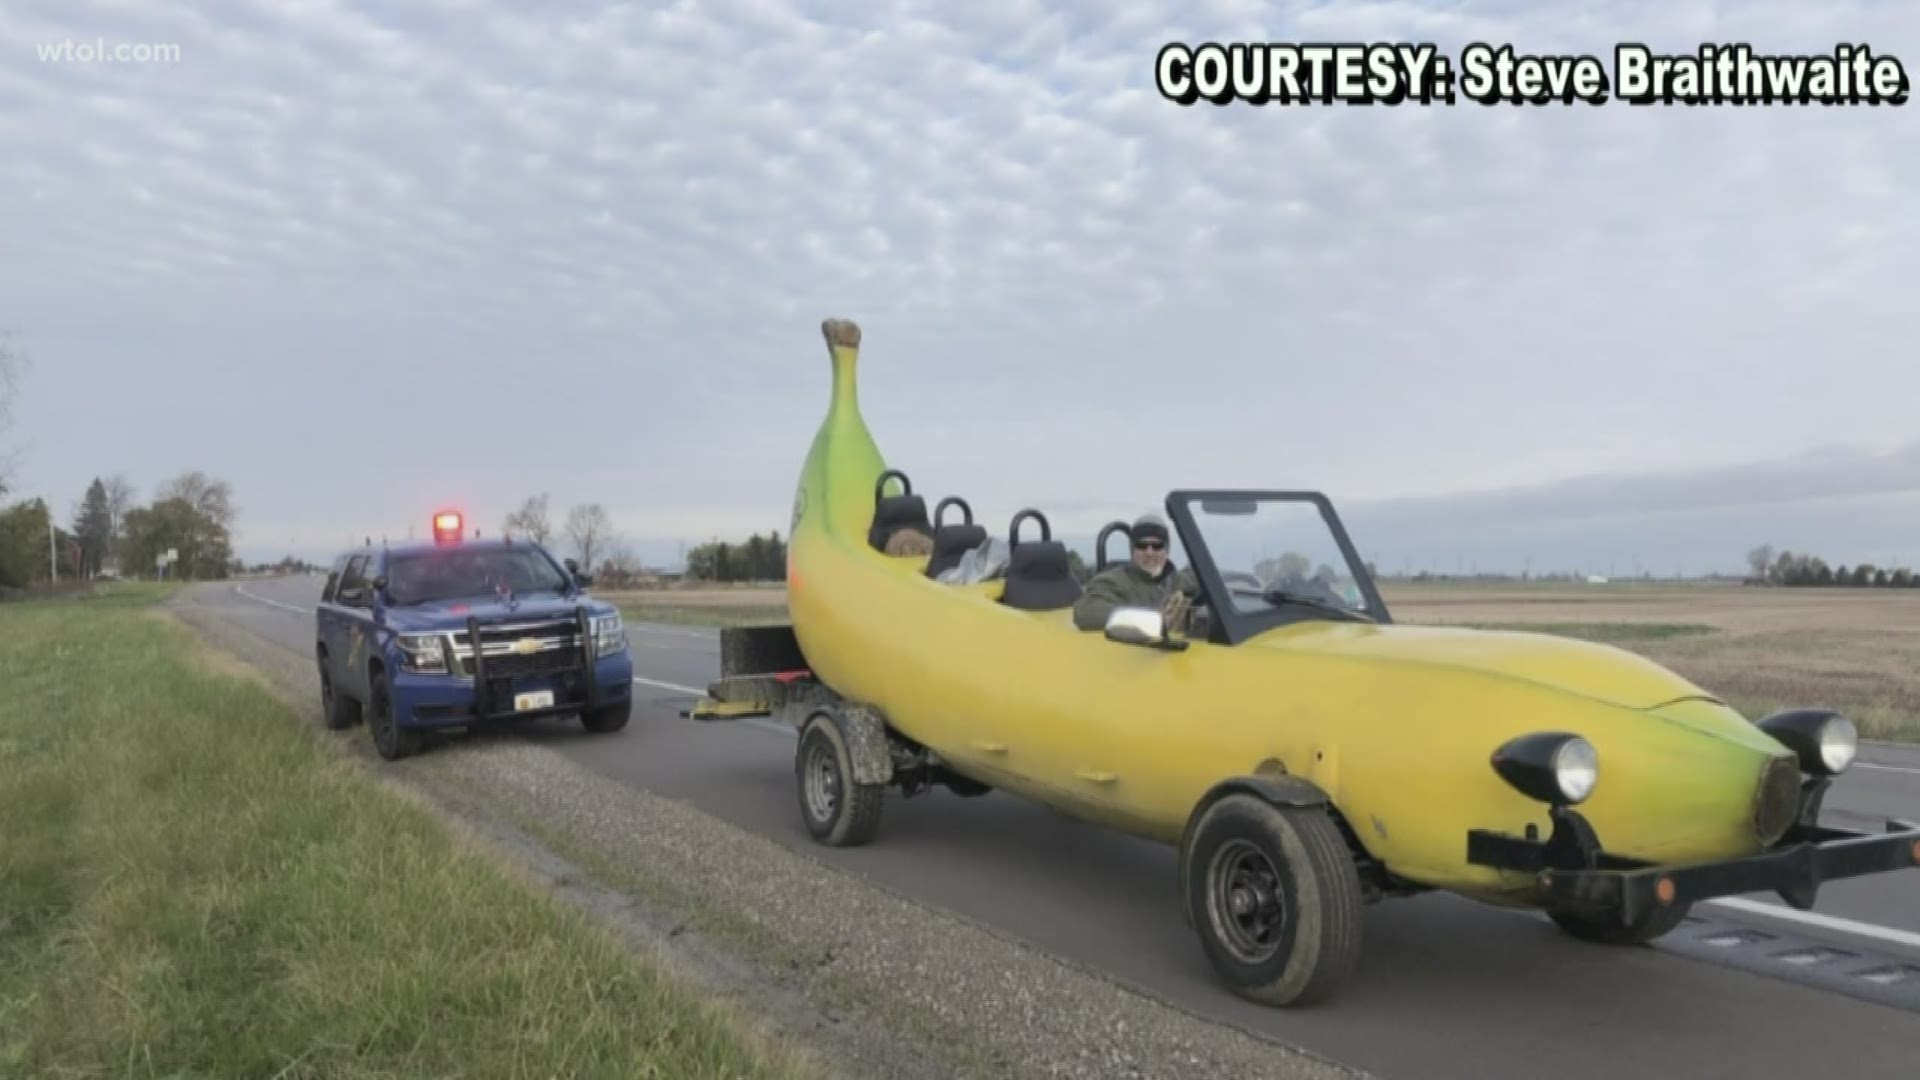 Michigan State Trooper Bill Strouse was monitoring traffic when he saw a banana car driving down the street.